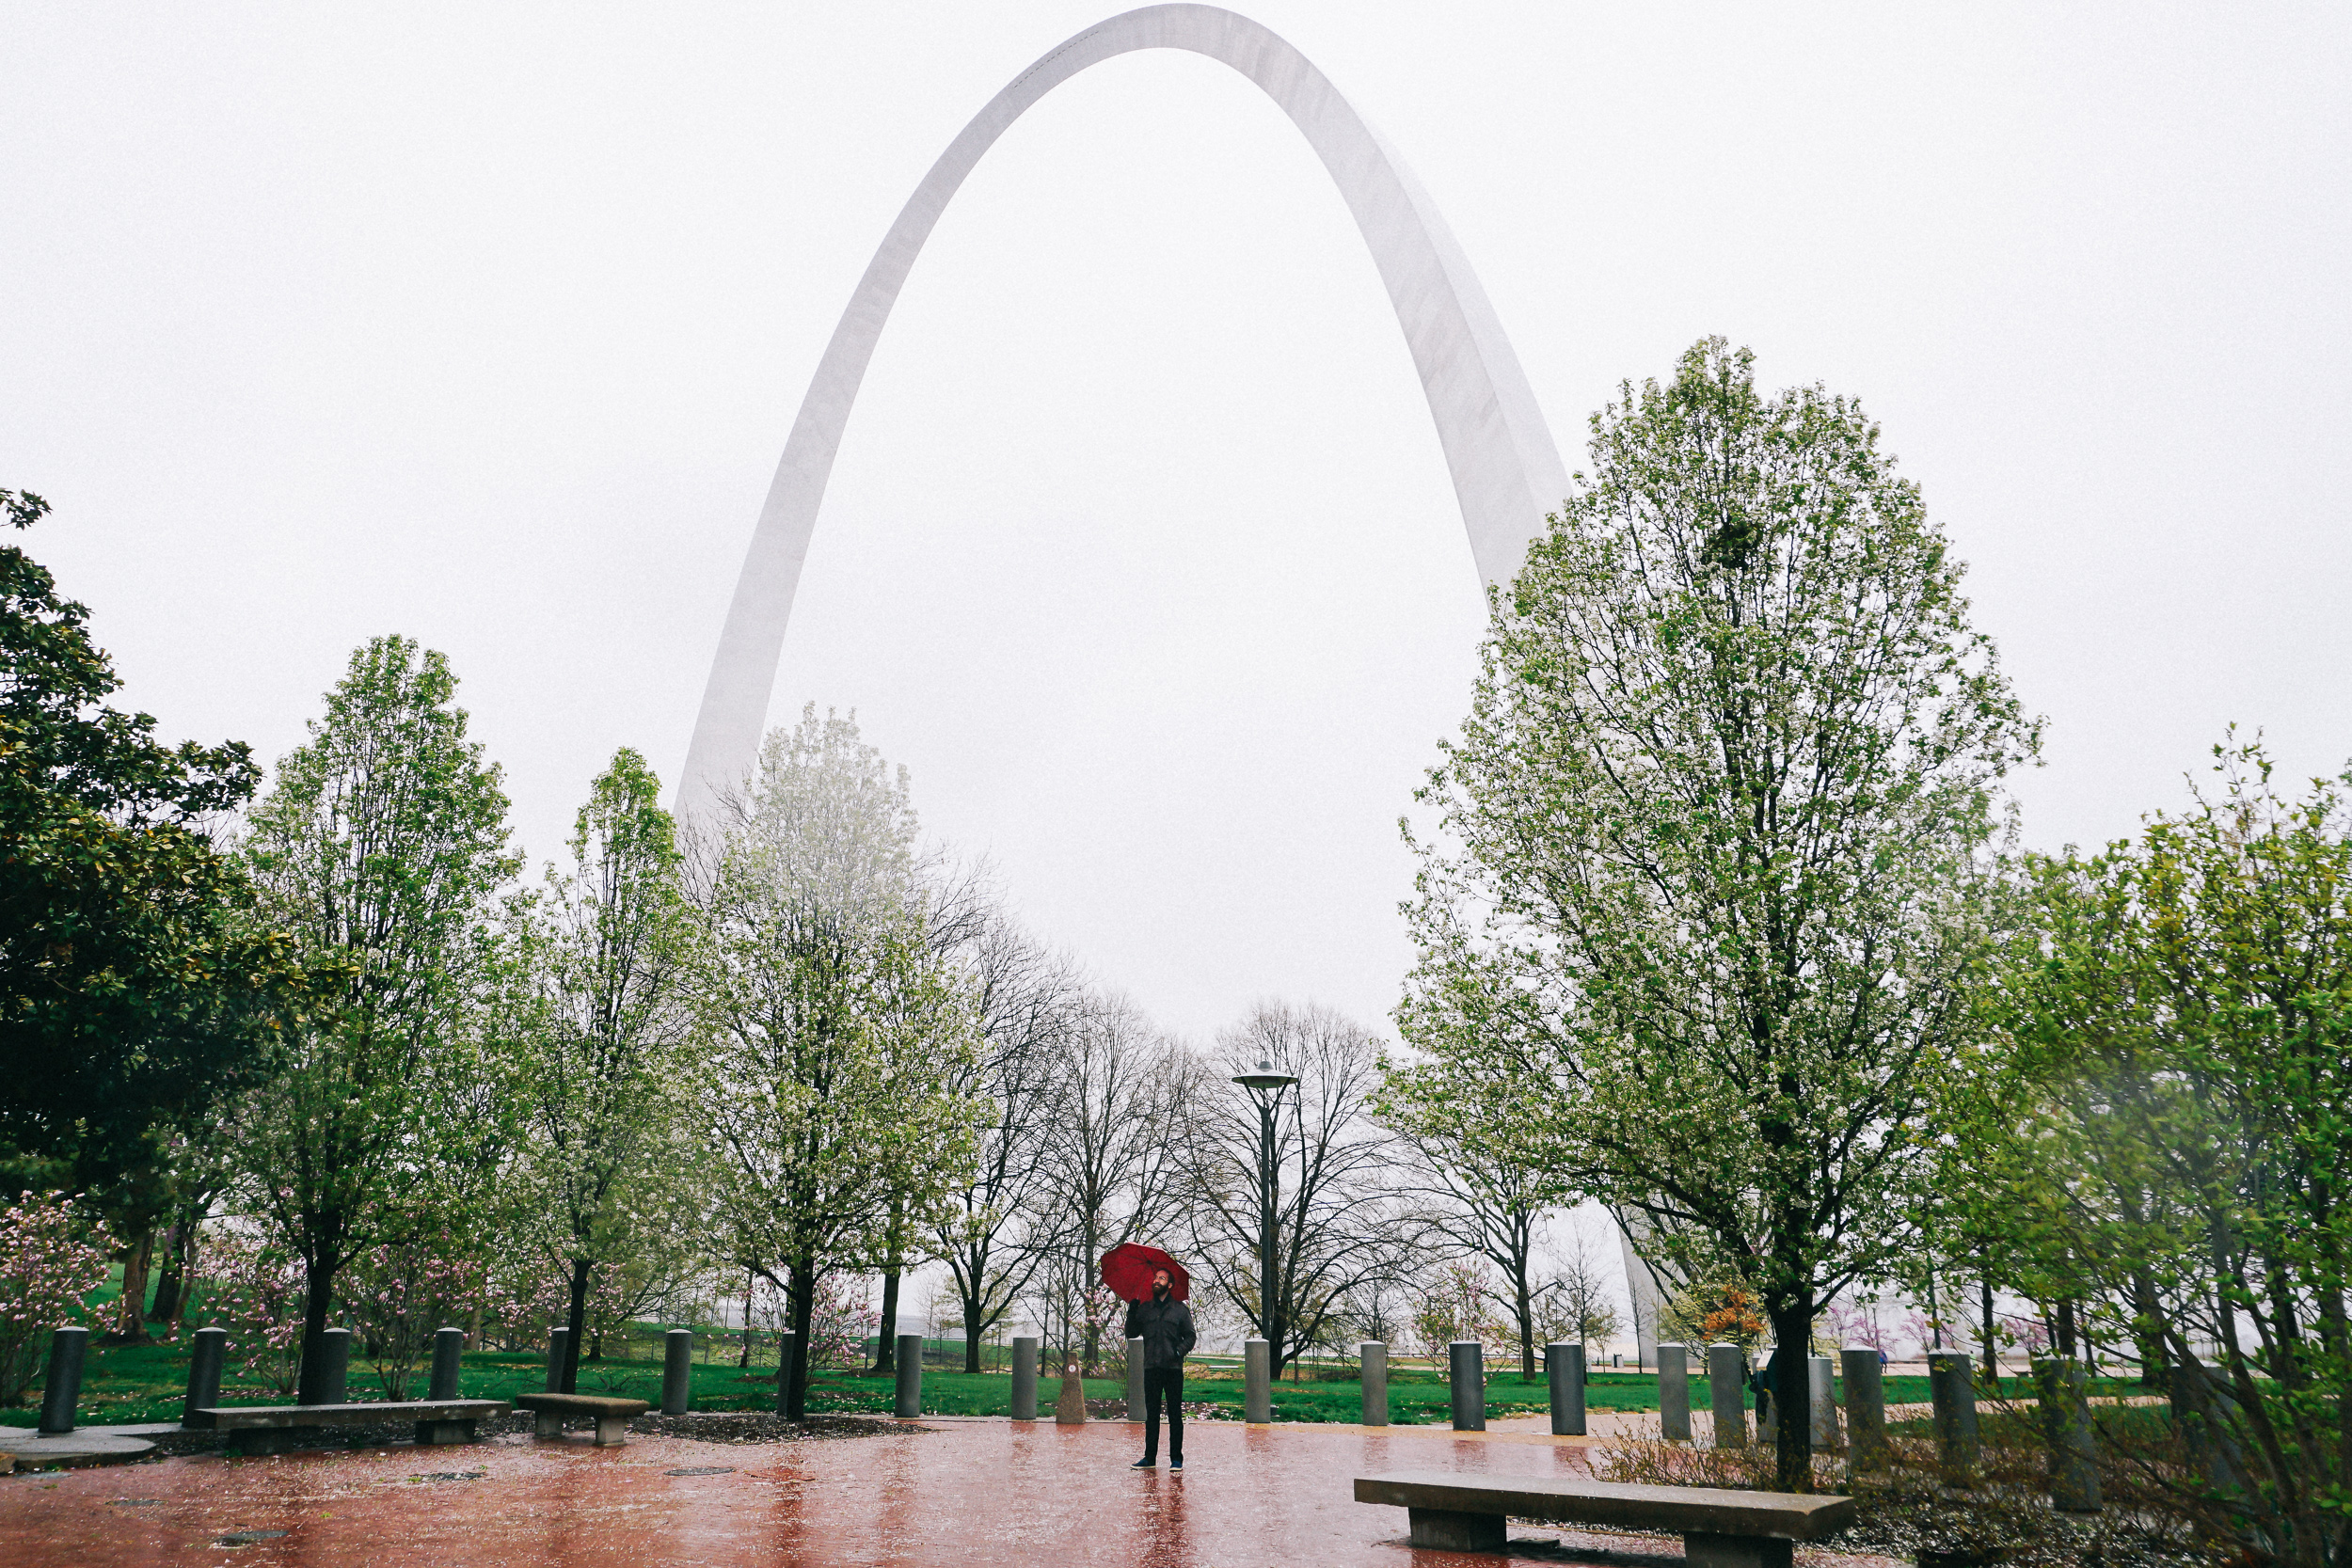 st louis_laura_suprenant_photography_travel-10.jpg